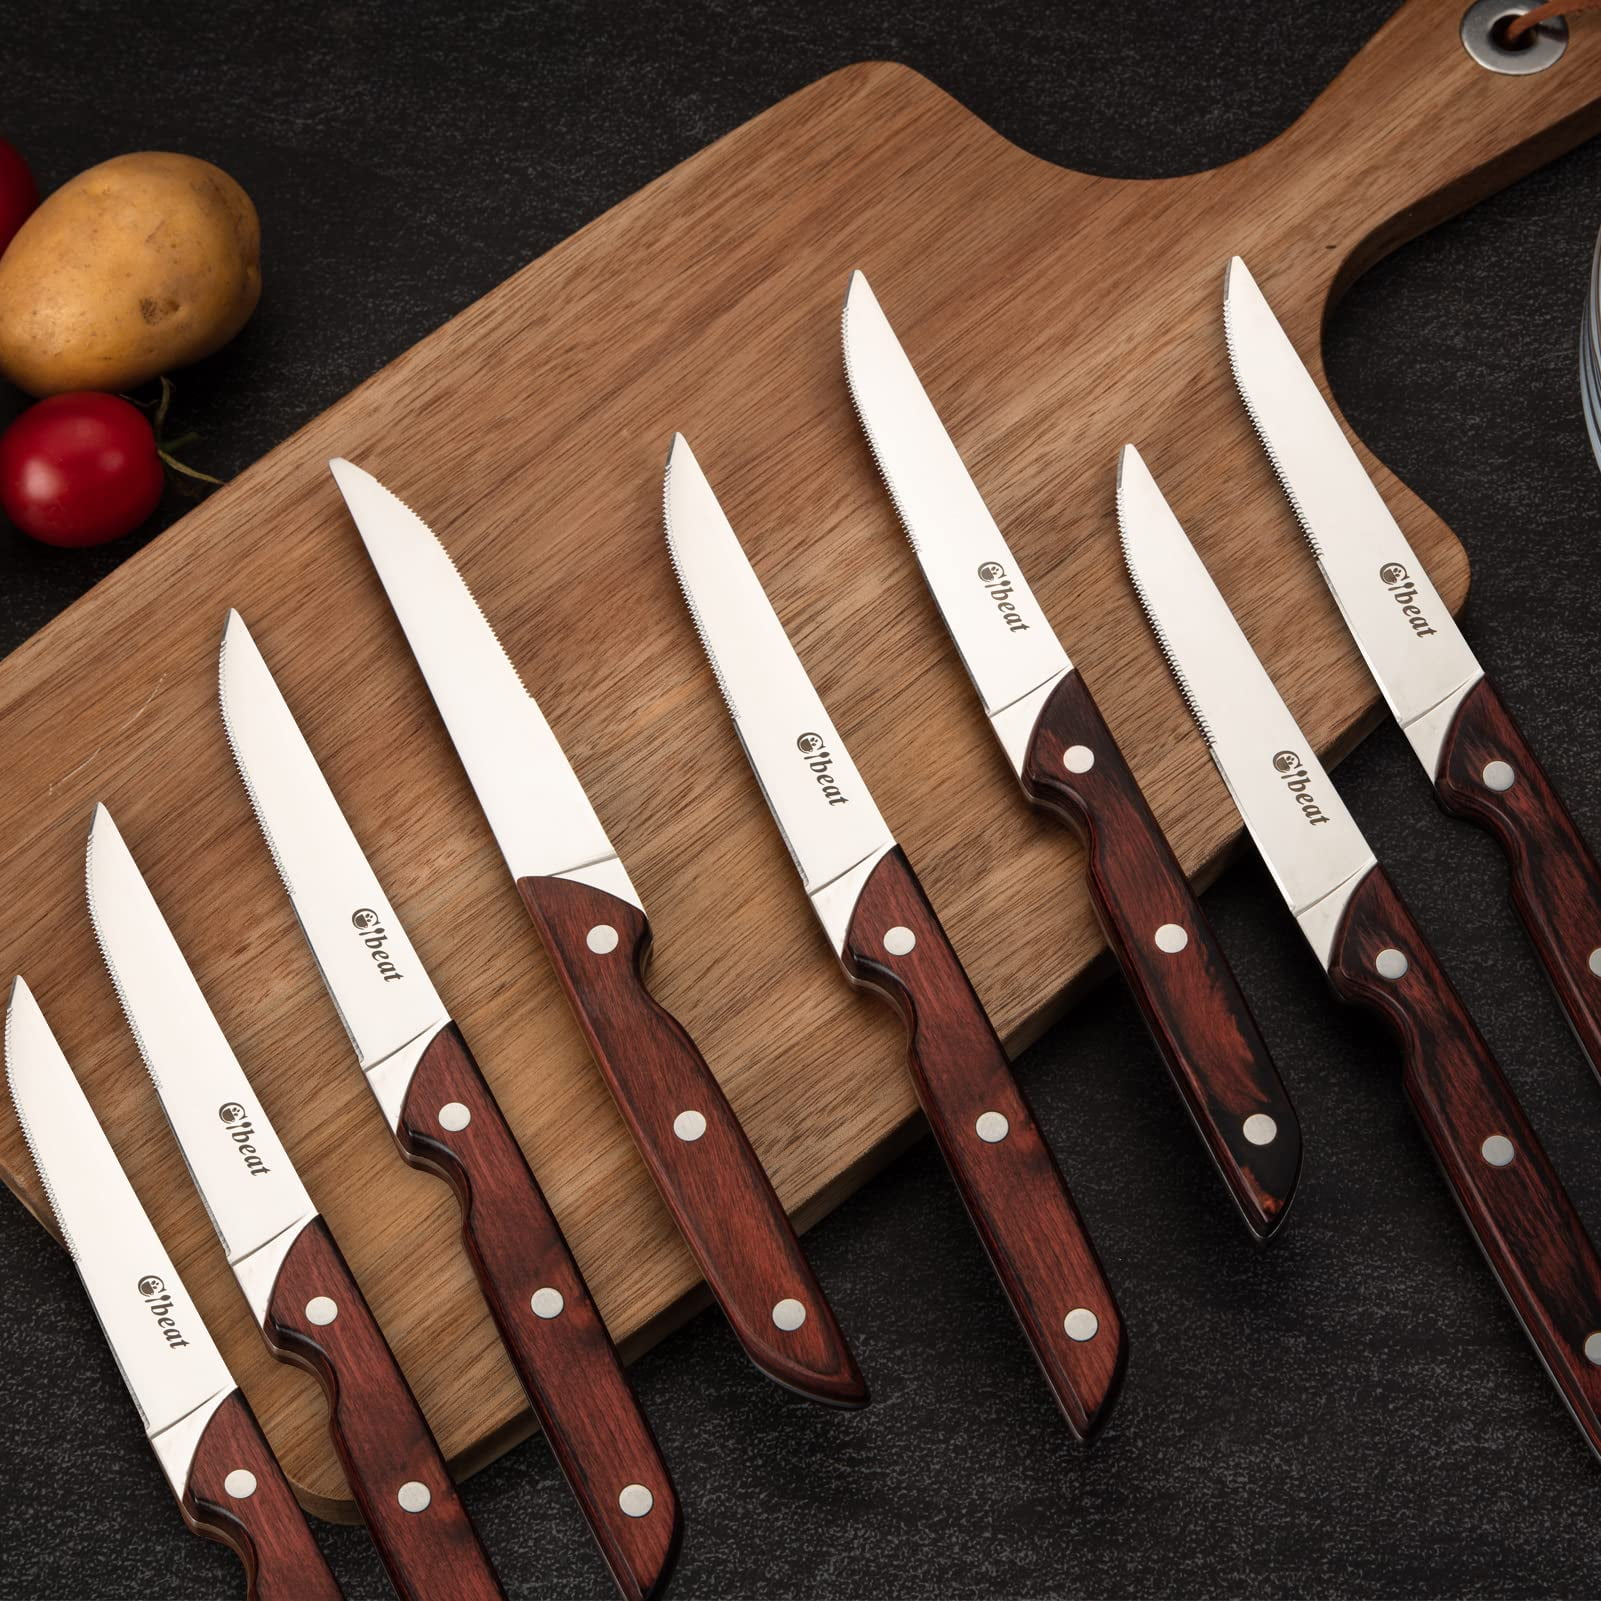 PICKWILL Steak Knives Set of 4, 4.5 Serrated Classic Steak Knife Set, High  Carbon Stainless Steel Kitchen Steak Knives with Ergonomic Handle, Durable